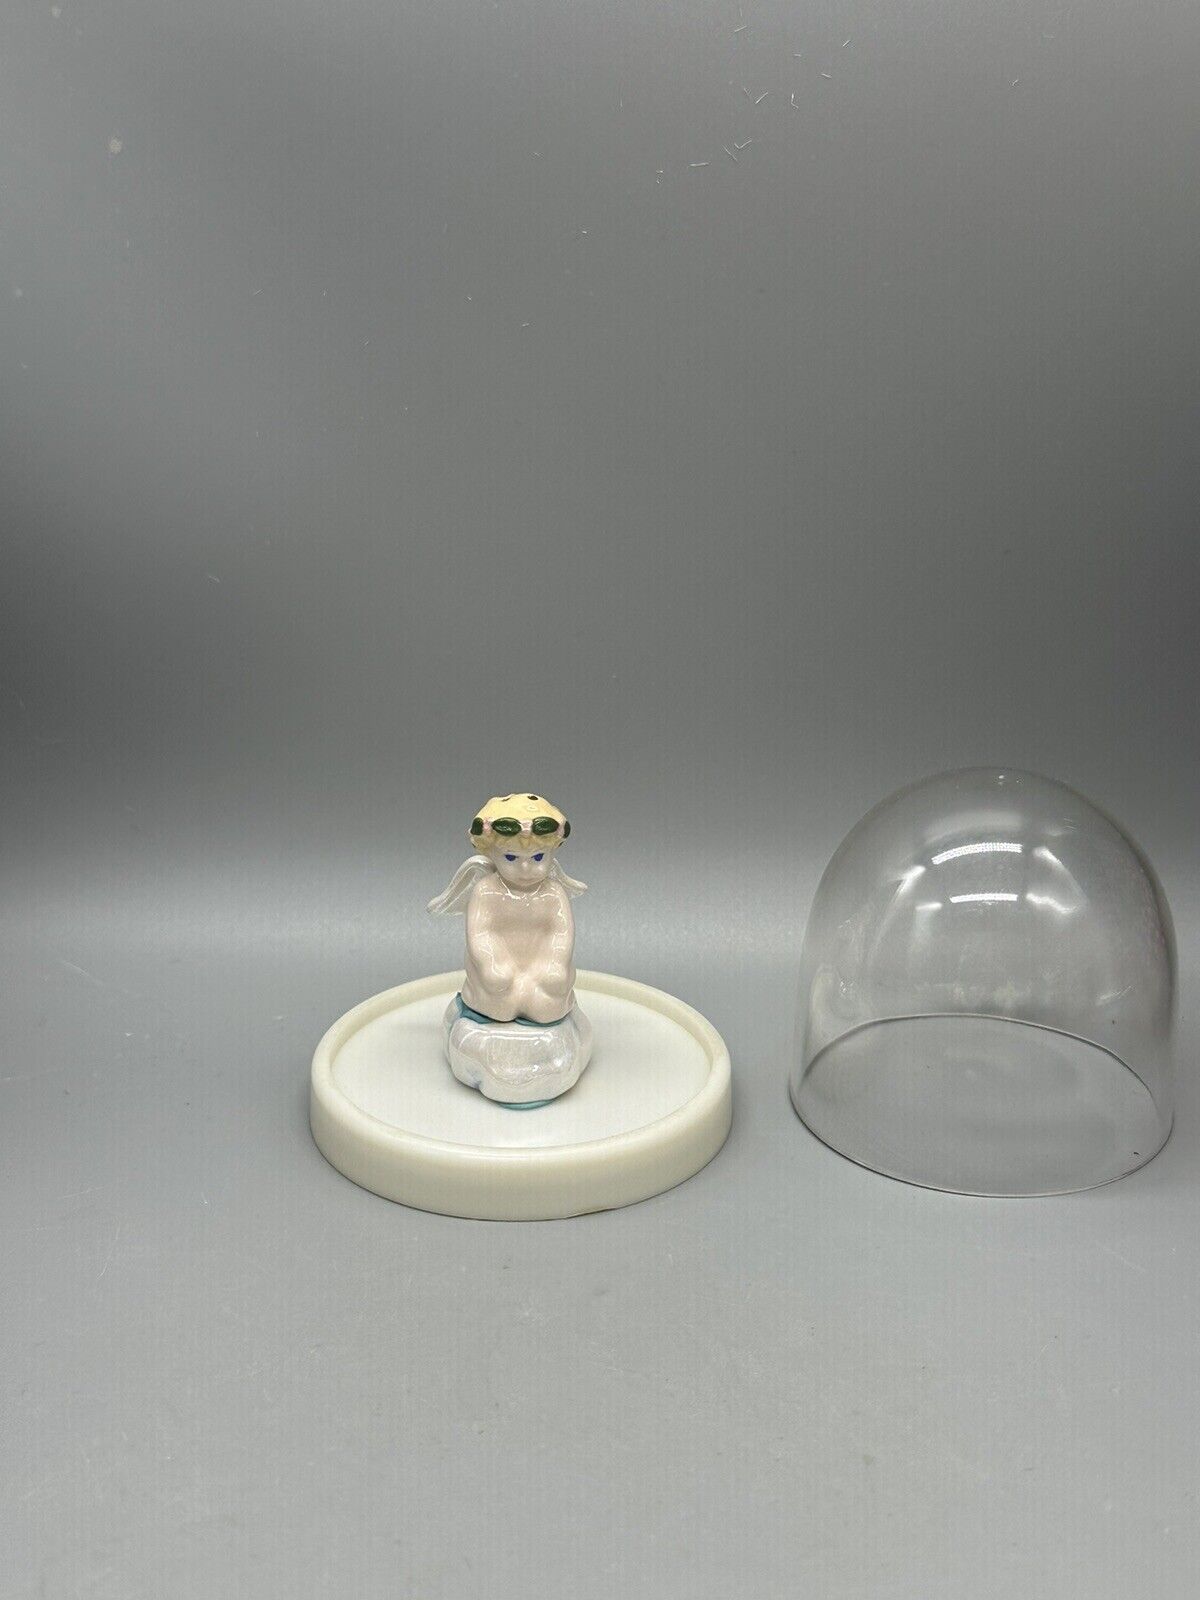 Sandy SRP Miniature Salt And Pepper shaker Angel With Dome